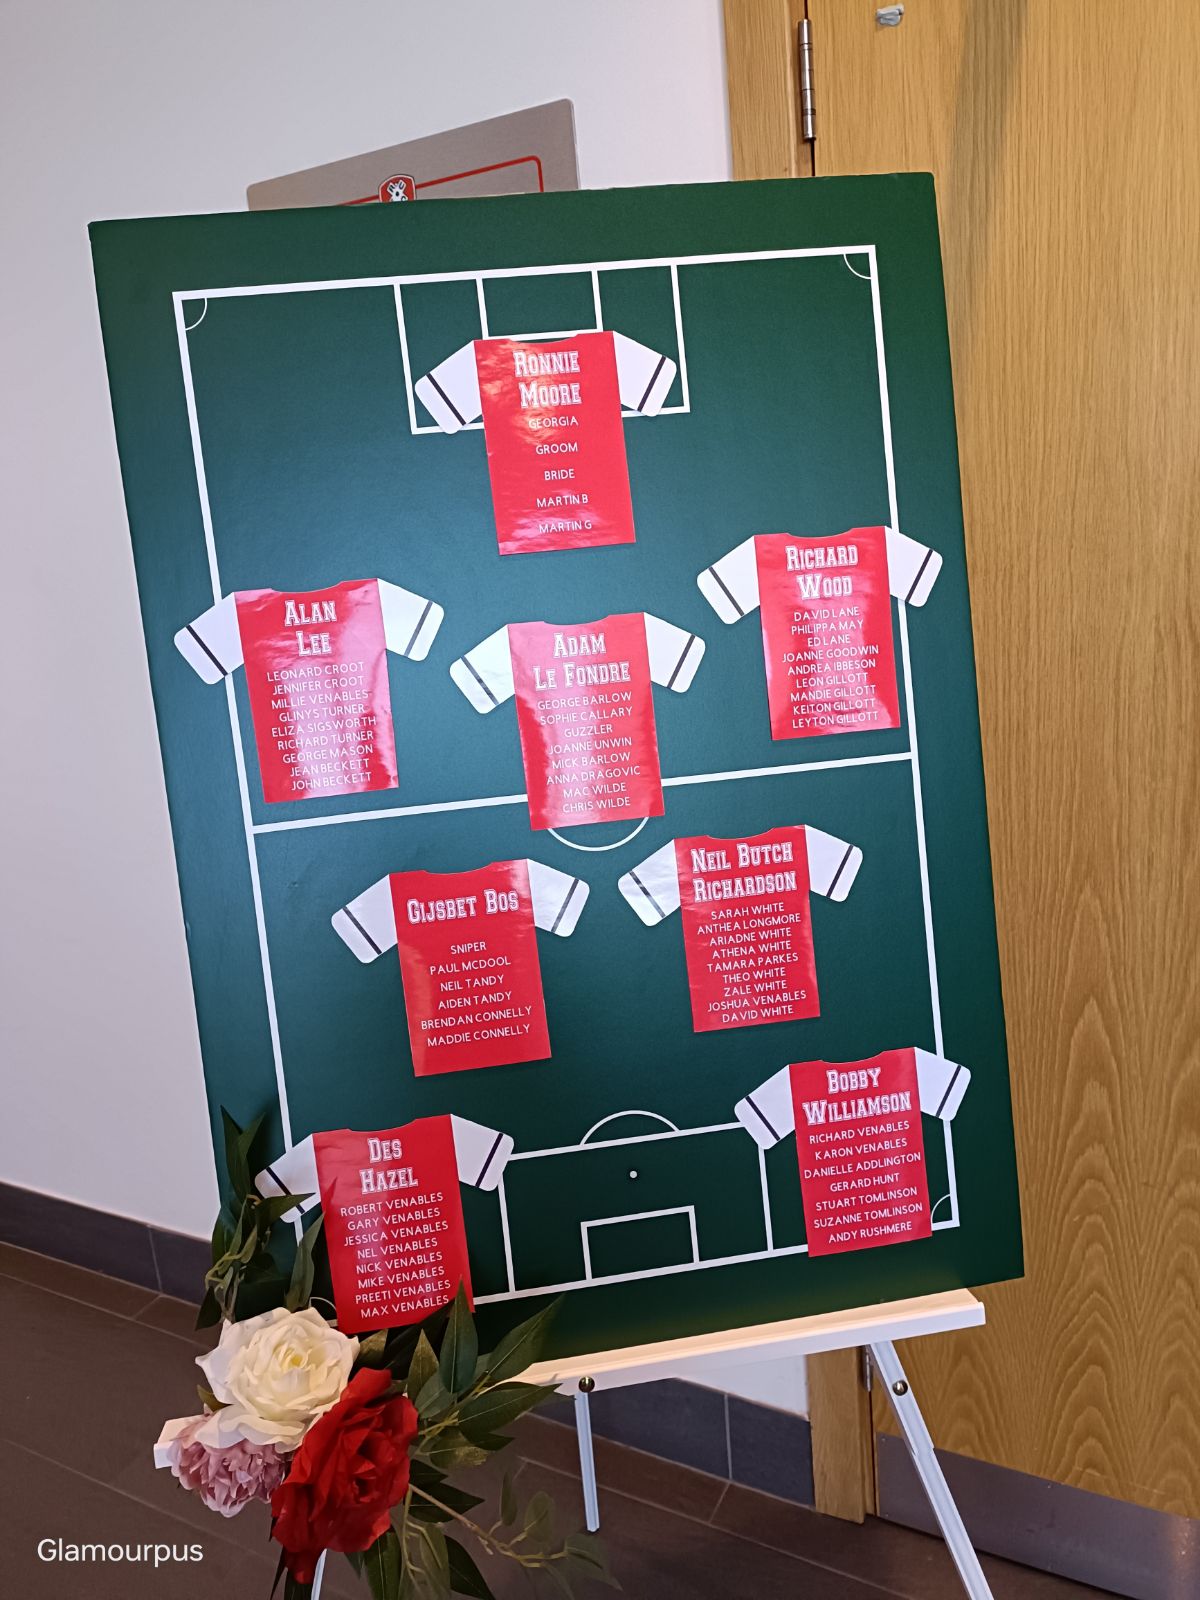 Football pitch table plan